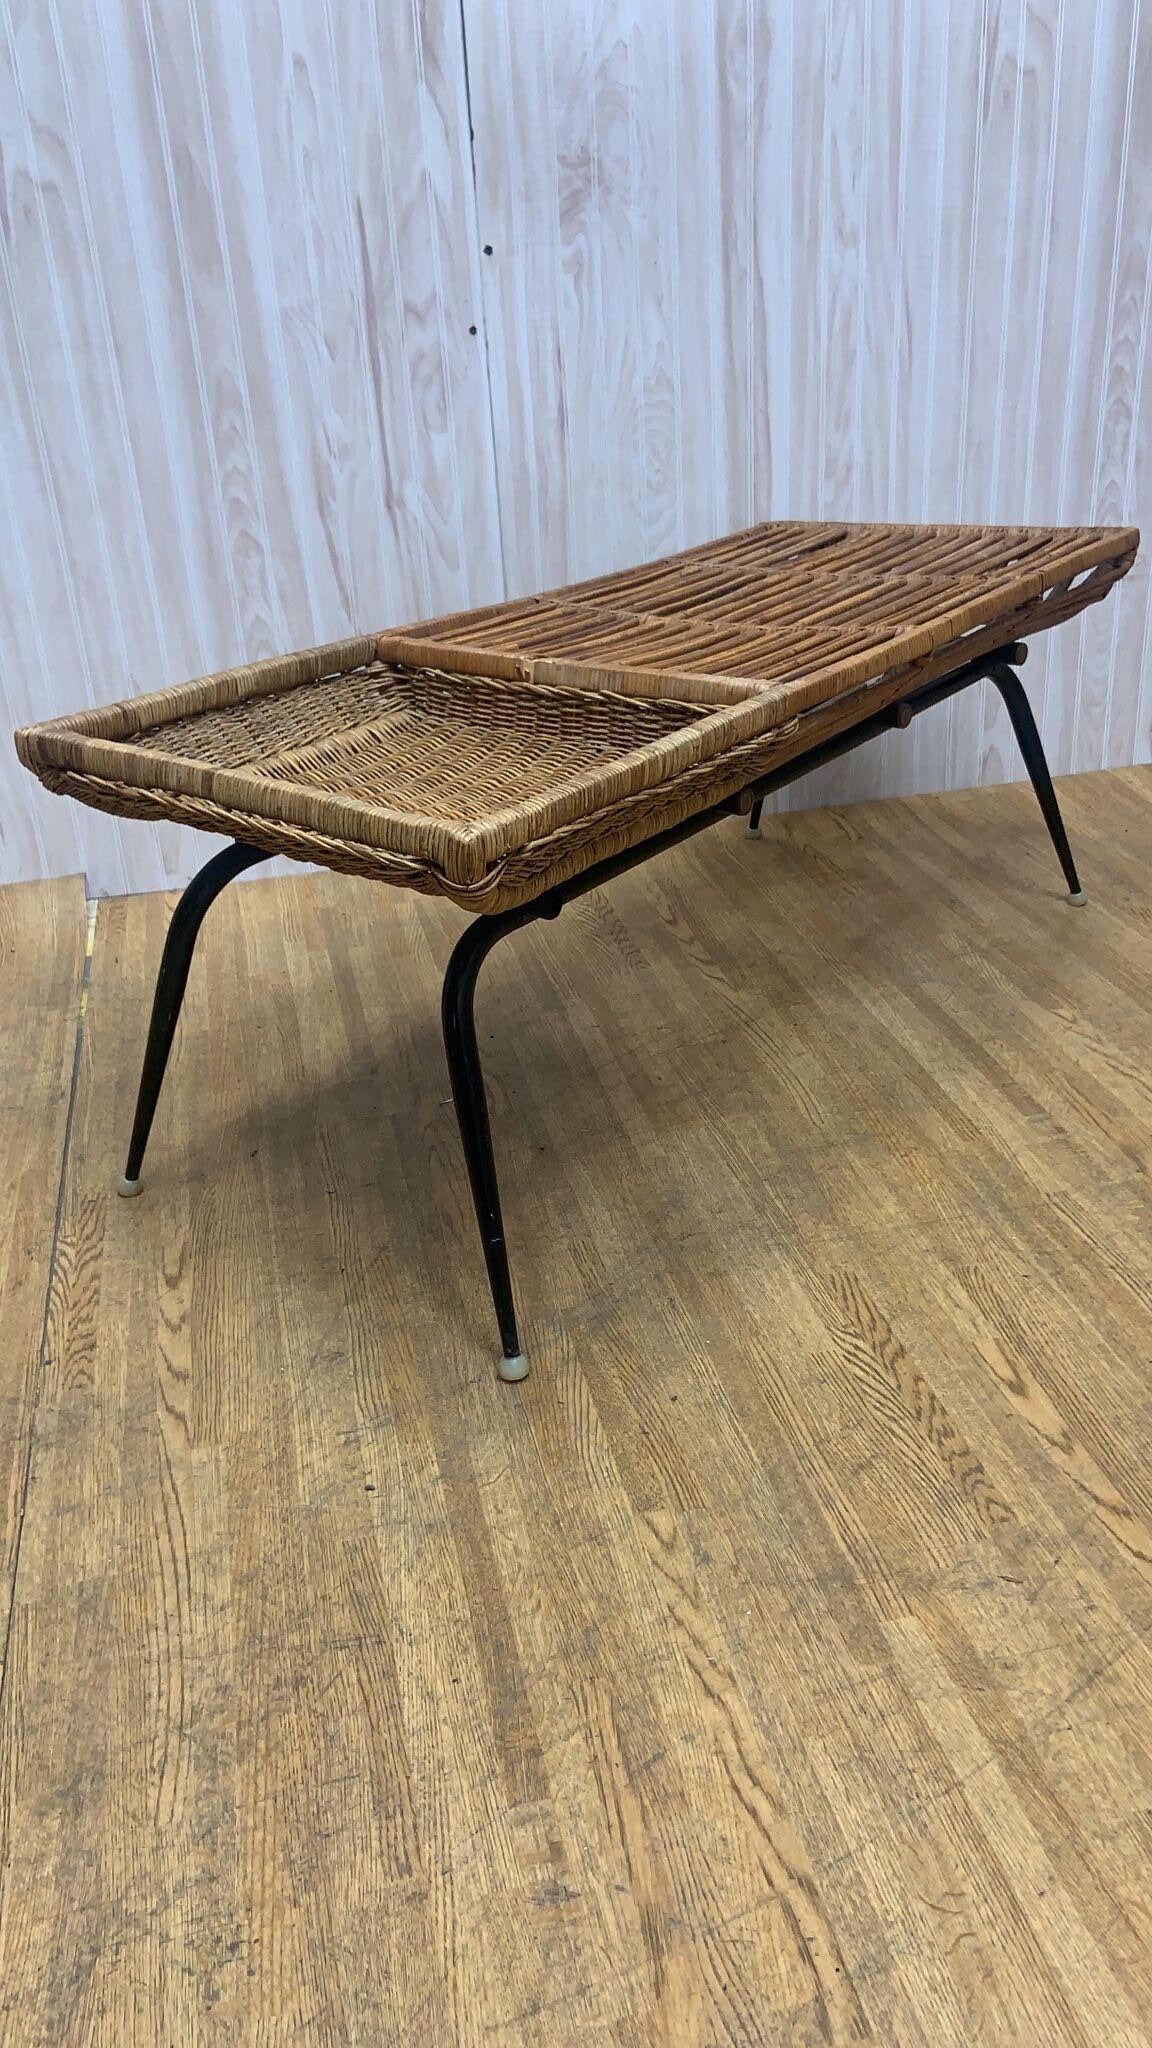 Vintage Modern Wicker Basket Cocktail Coffee Table by Troy Sunshade Co.